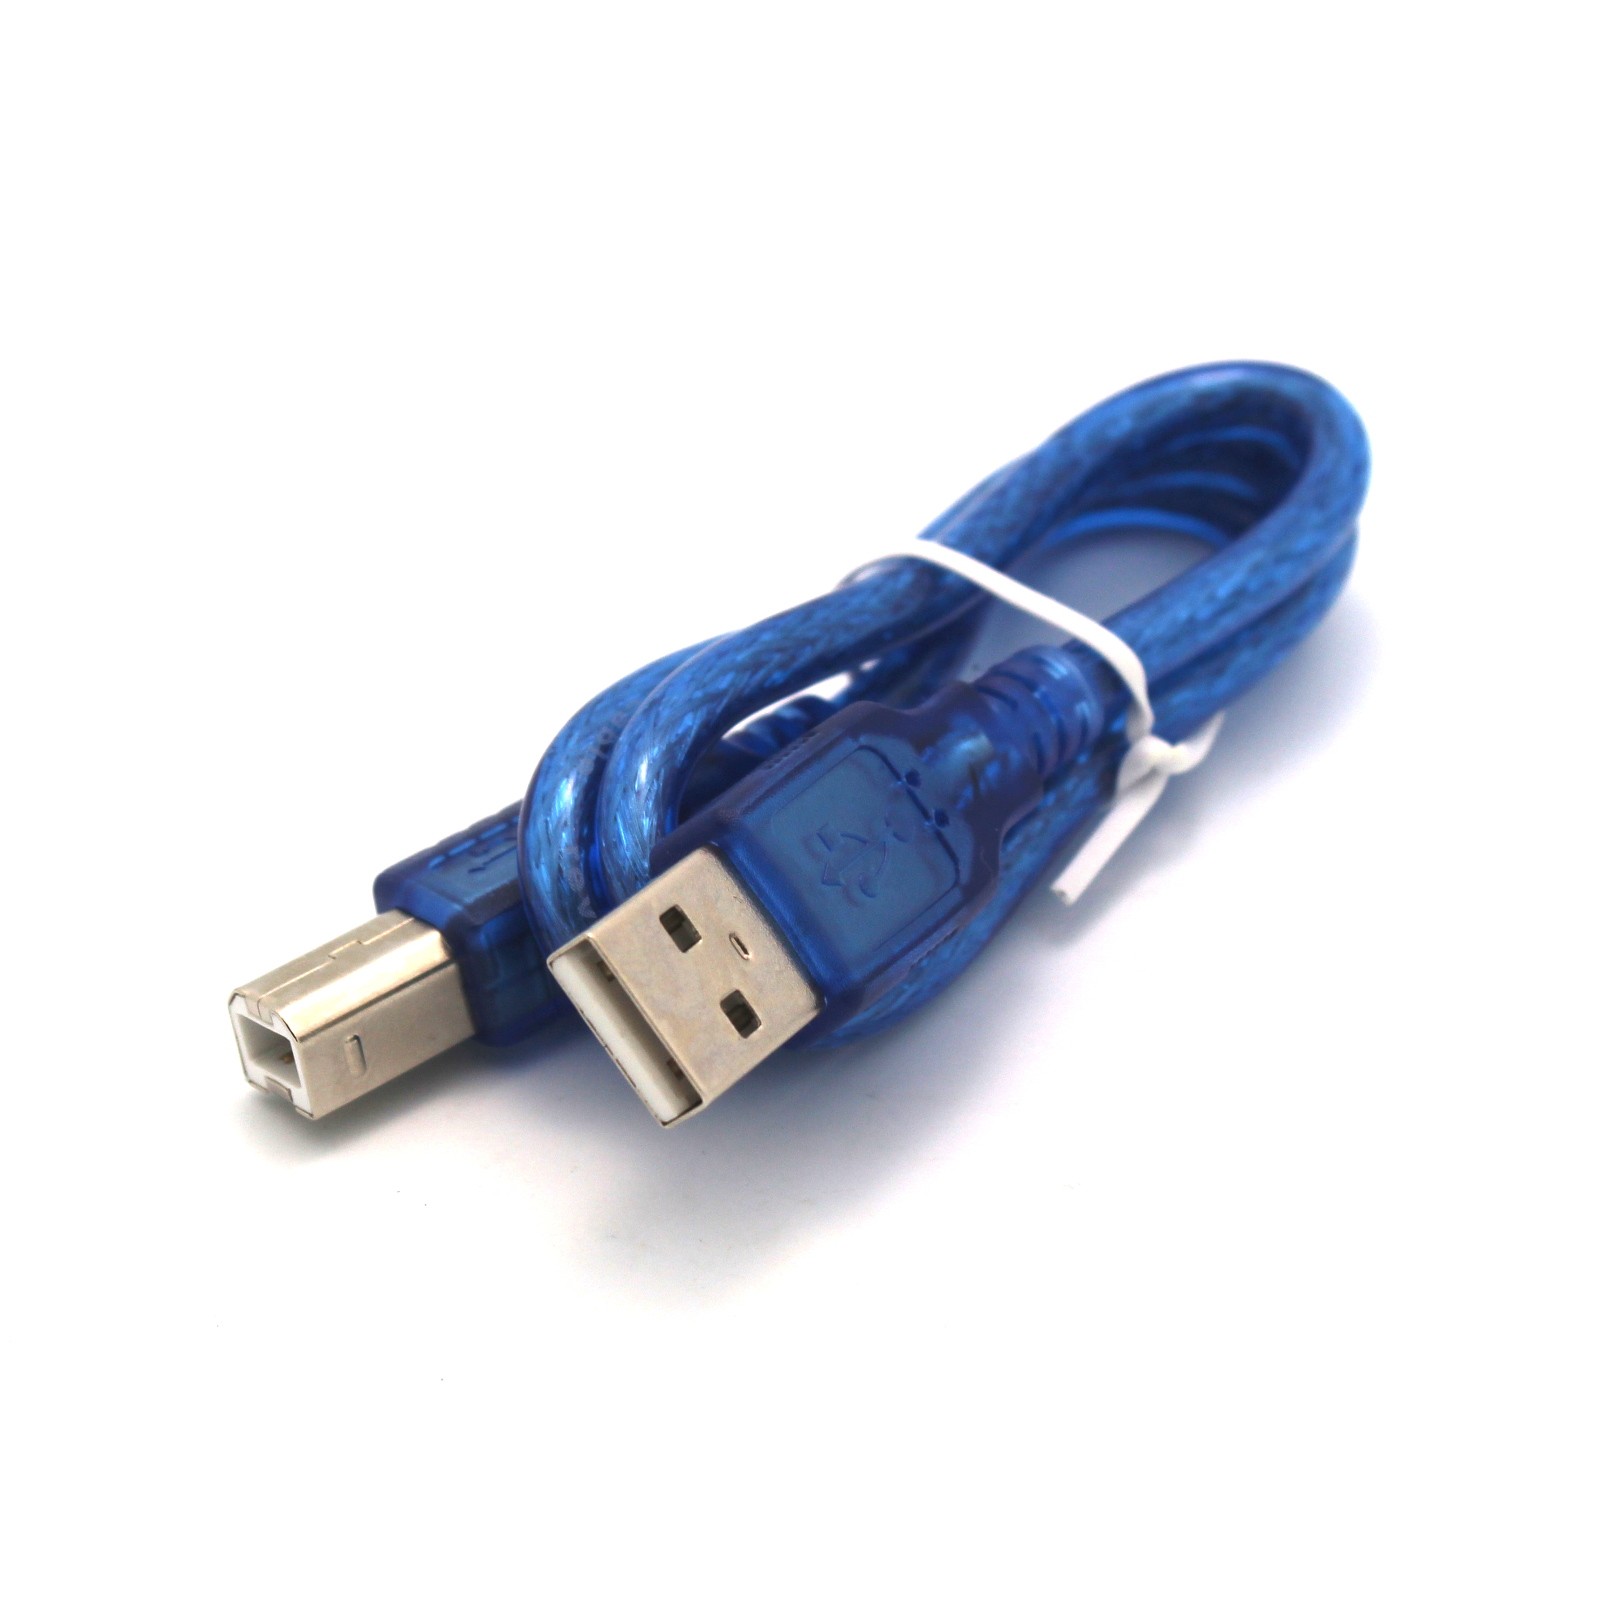 $2.99 - 1.6ft USB A to B Cable (Arduino USB Cable) - Tinkersphere